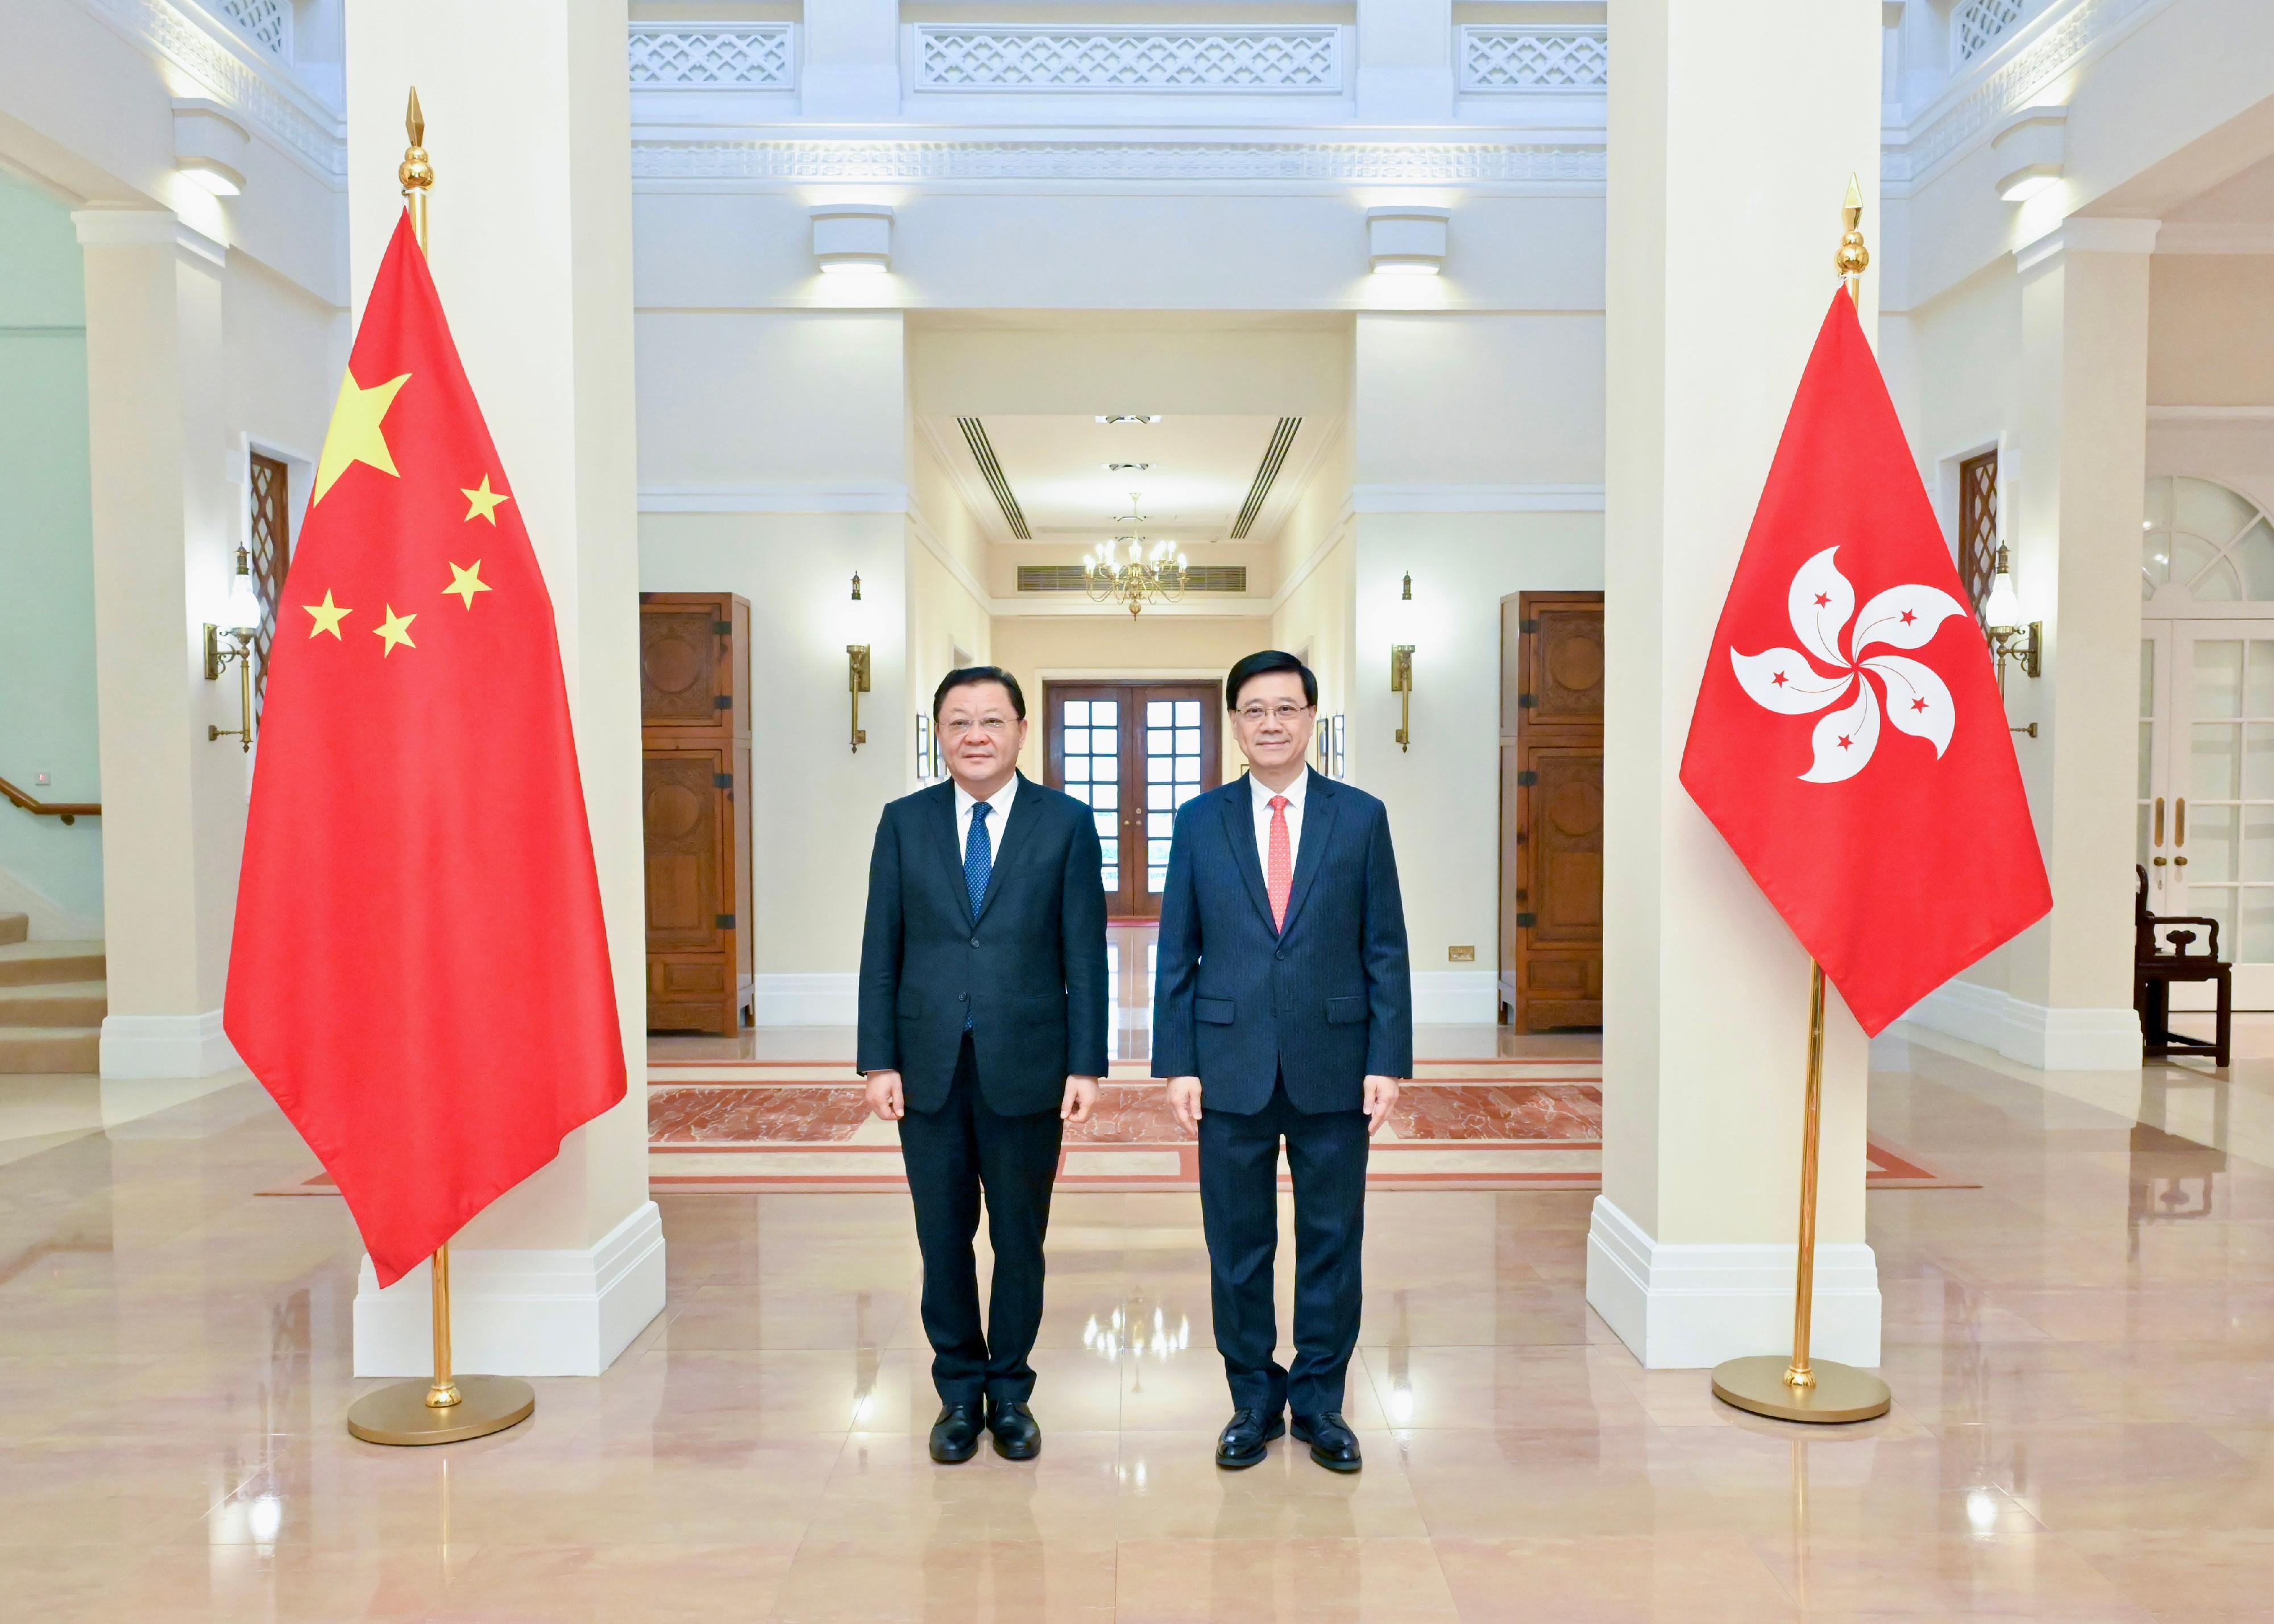 The Chief Executive, Mr John Lee (right), met the Governor of Guangdong Province, Mr Wang Weizhong (left), at Government House today (March 18).